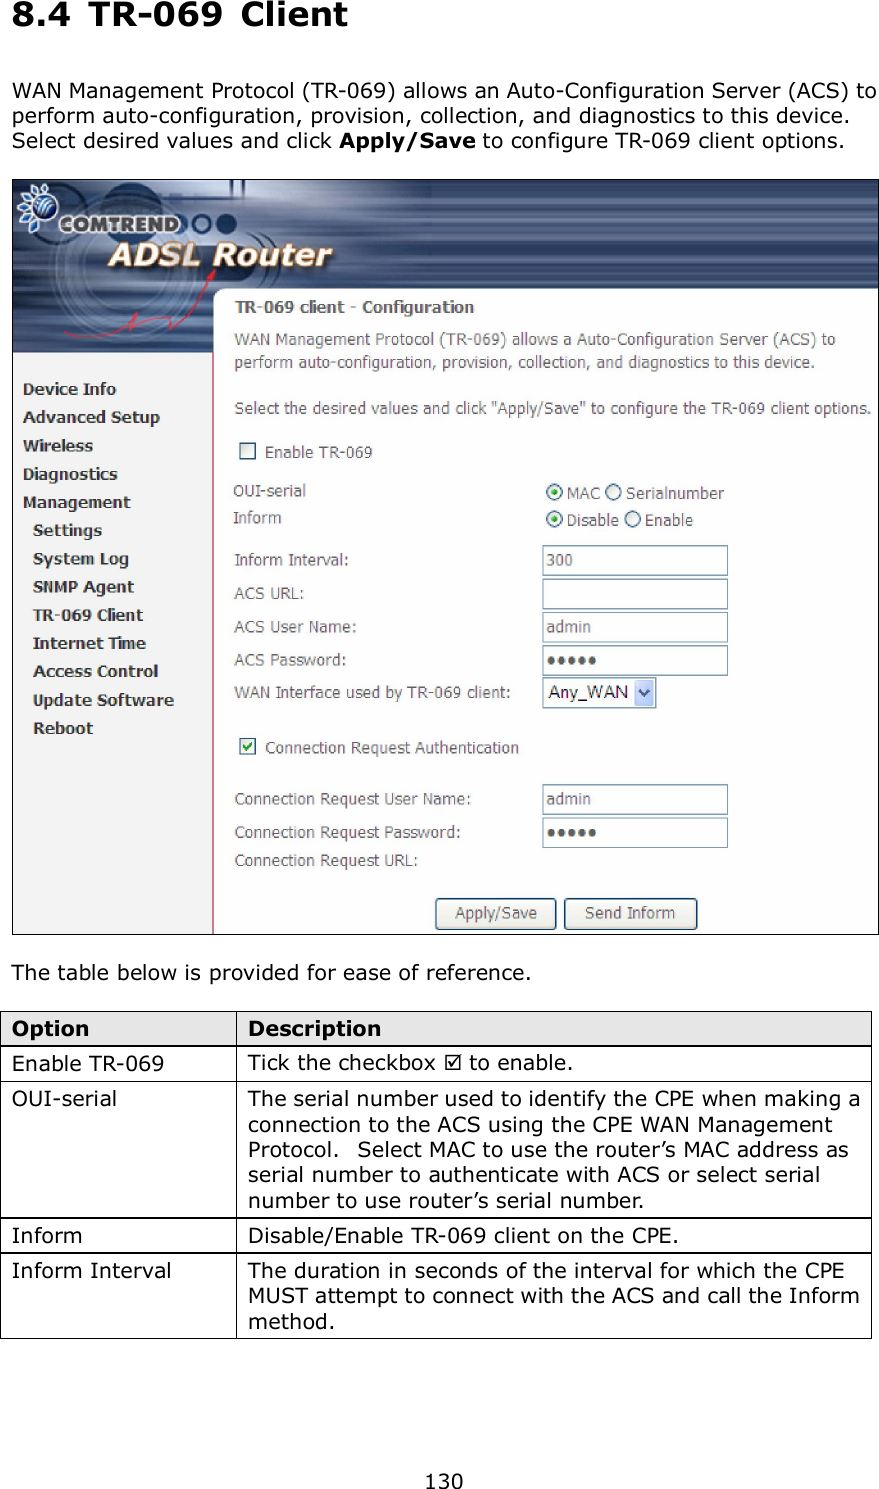  130 8.4  TR-069  Client  WAN Management Protocol (TR-069) allows an Auto-Configuration Server (ACS) to perform auto-configuration, provision, collection, and diagnostics to this device.   Select desired values and click Apply/Save to configure TR-069 client options.    The table below is provided for ease of reference.  Option  Description Enable TR-069  Tick the checkbox  to enable. OUI-serial  The serial number used to identify the CPE when making a connection to the ACS using the CPE WAN Management Protocol.  Select MAC to use the router’s MAC address as serial number to authenticate with ACS or select serial number to use router’s serial number. Inform  Disable/Enable TR-069 client on the CPE. Inform Interval  The duration in seconds of the interval for which the CPE MUST attempt to connect with the ACS and call the Inform method. 